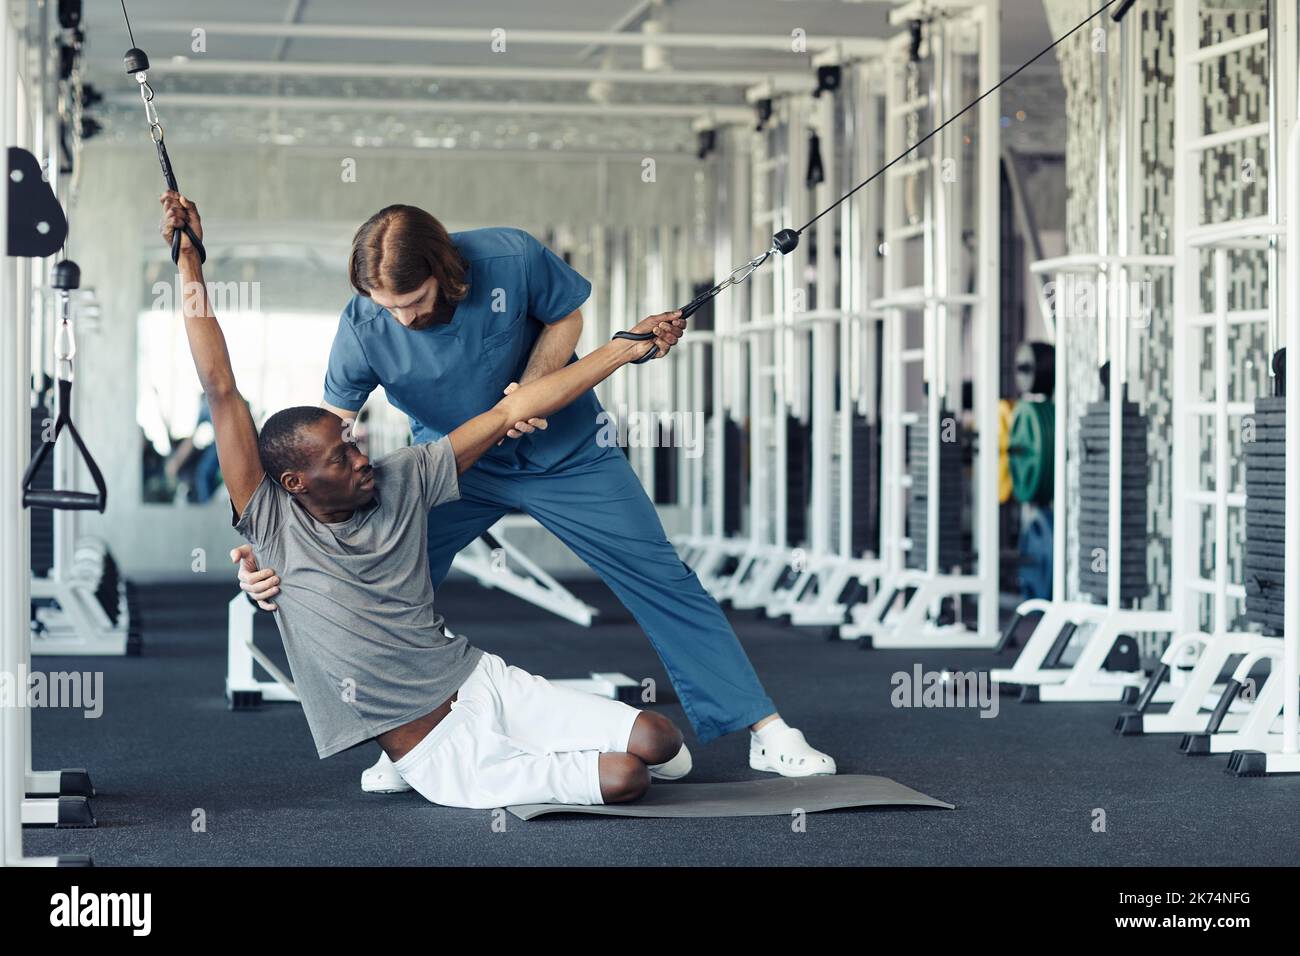 African patient doing stretching exercises together with doctor during sport training in gym Stock Photo